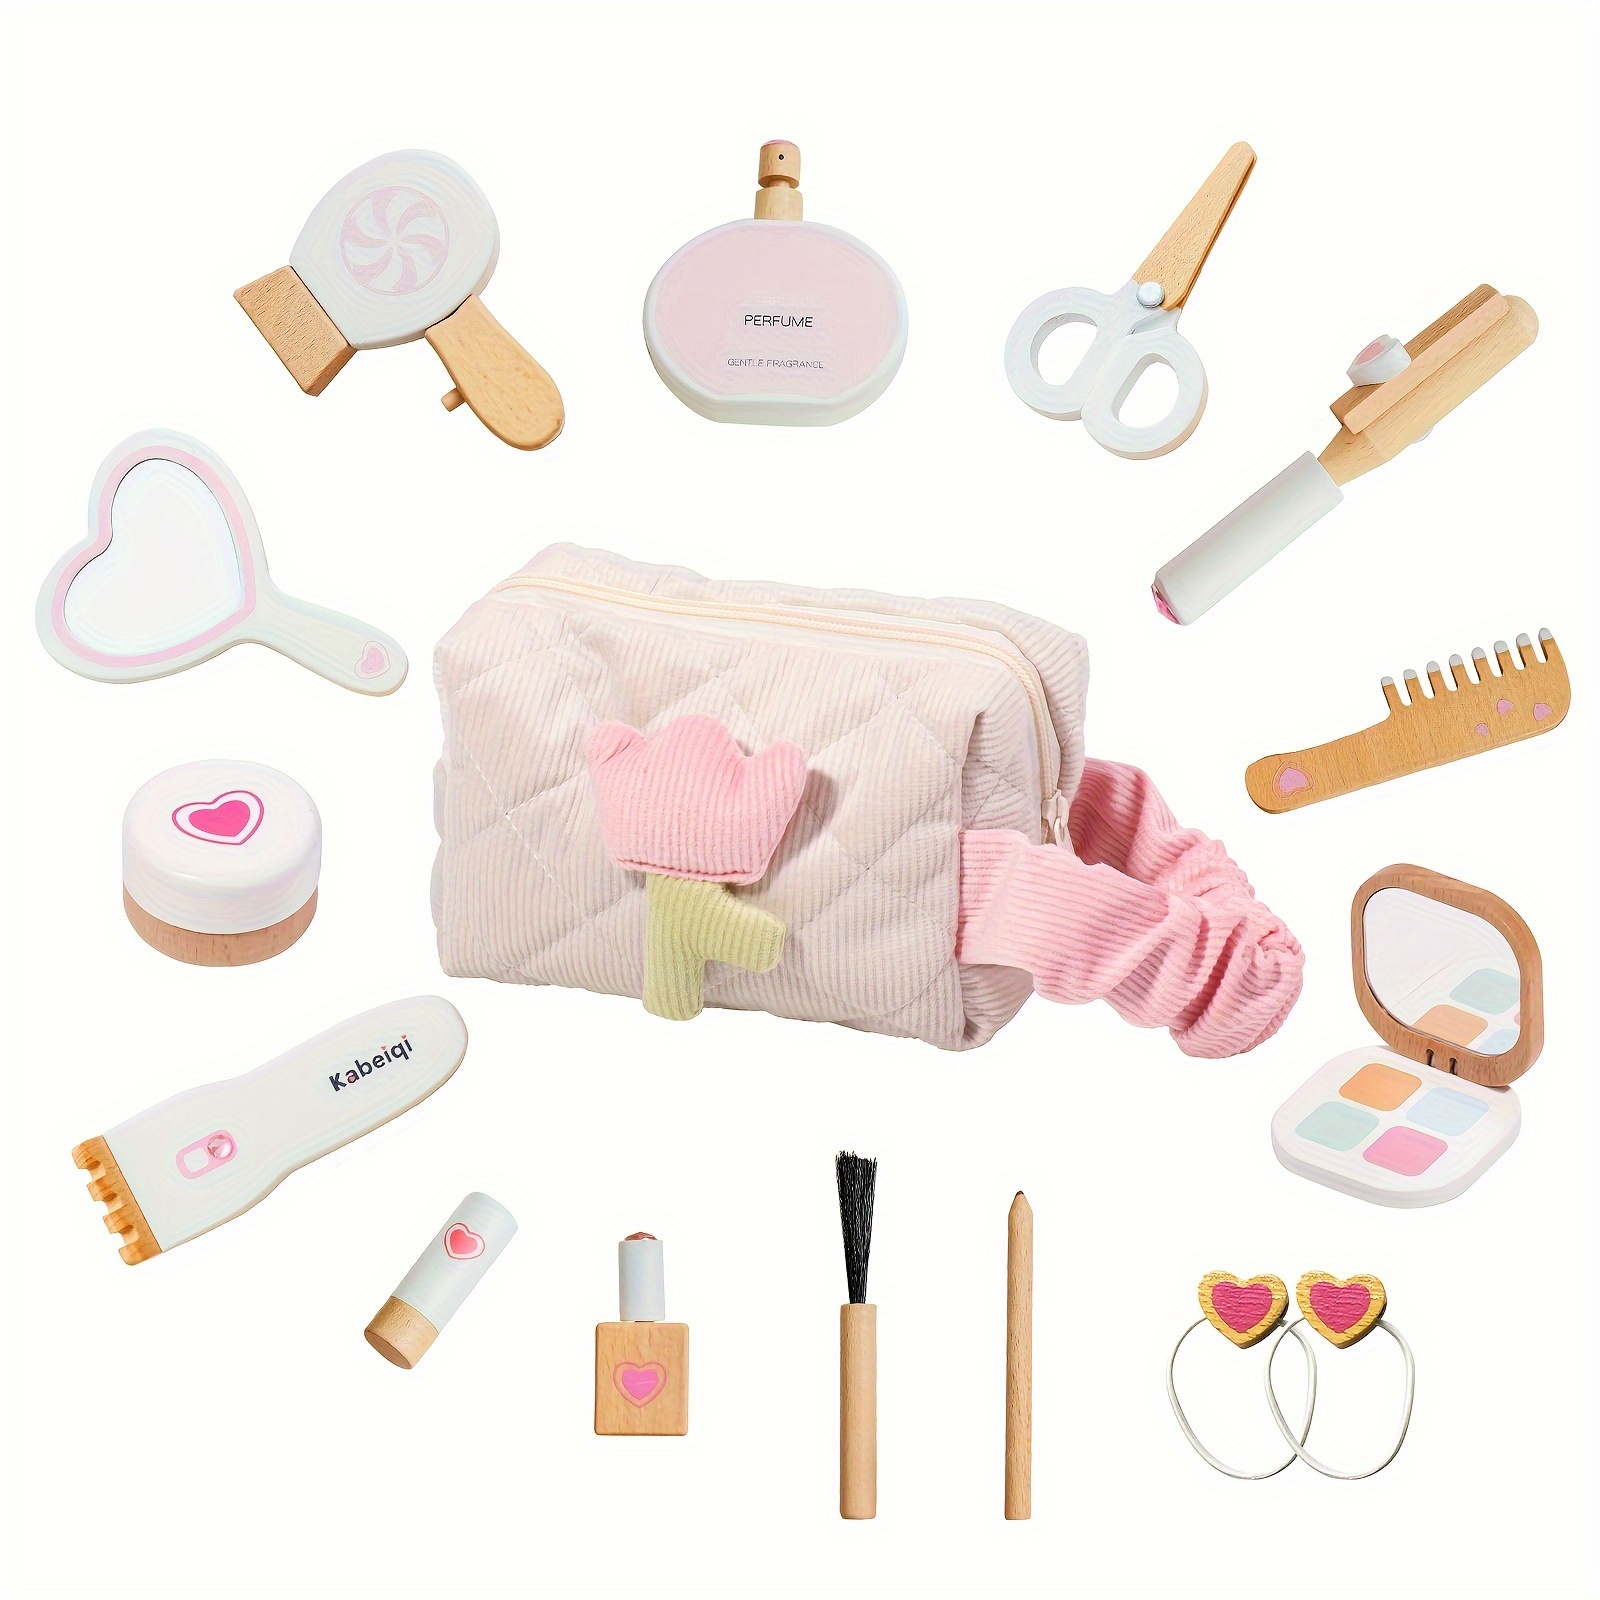 

Wooden Makeup Kit Toy For Toddlers, Pretend Play Beauty Salon Set With Styling Tools, Cosmetics And Storage Bag For Kids Age 3+